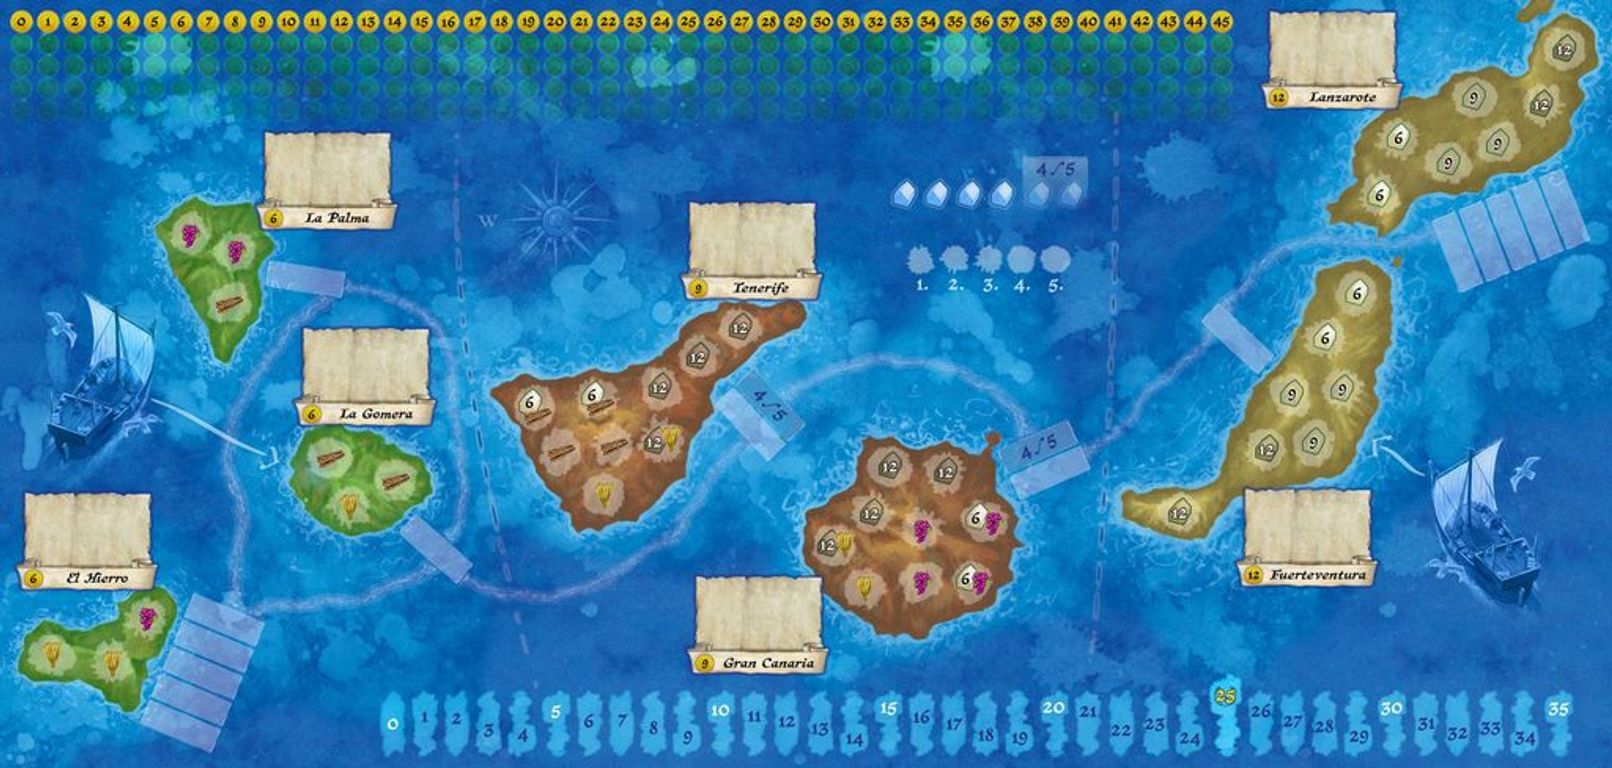 West of Africa game board